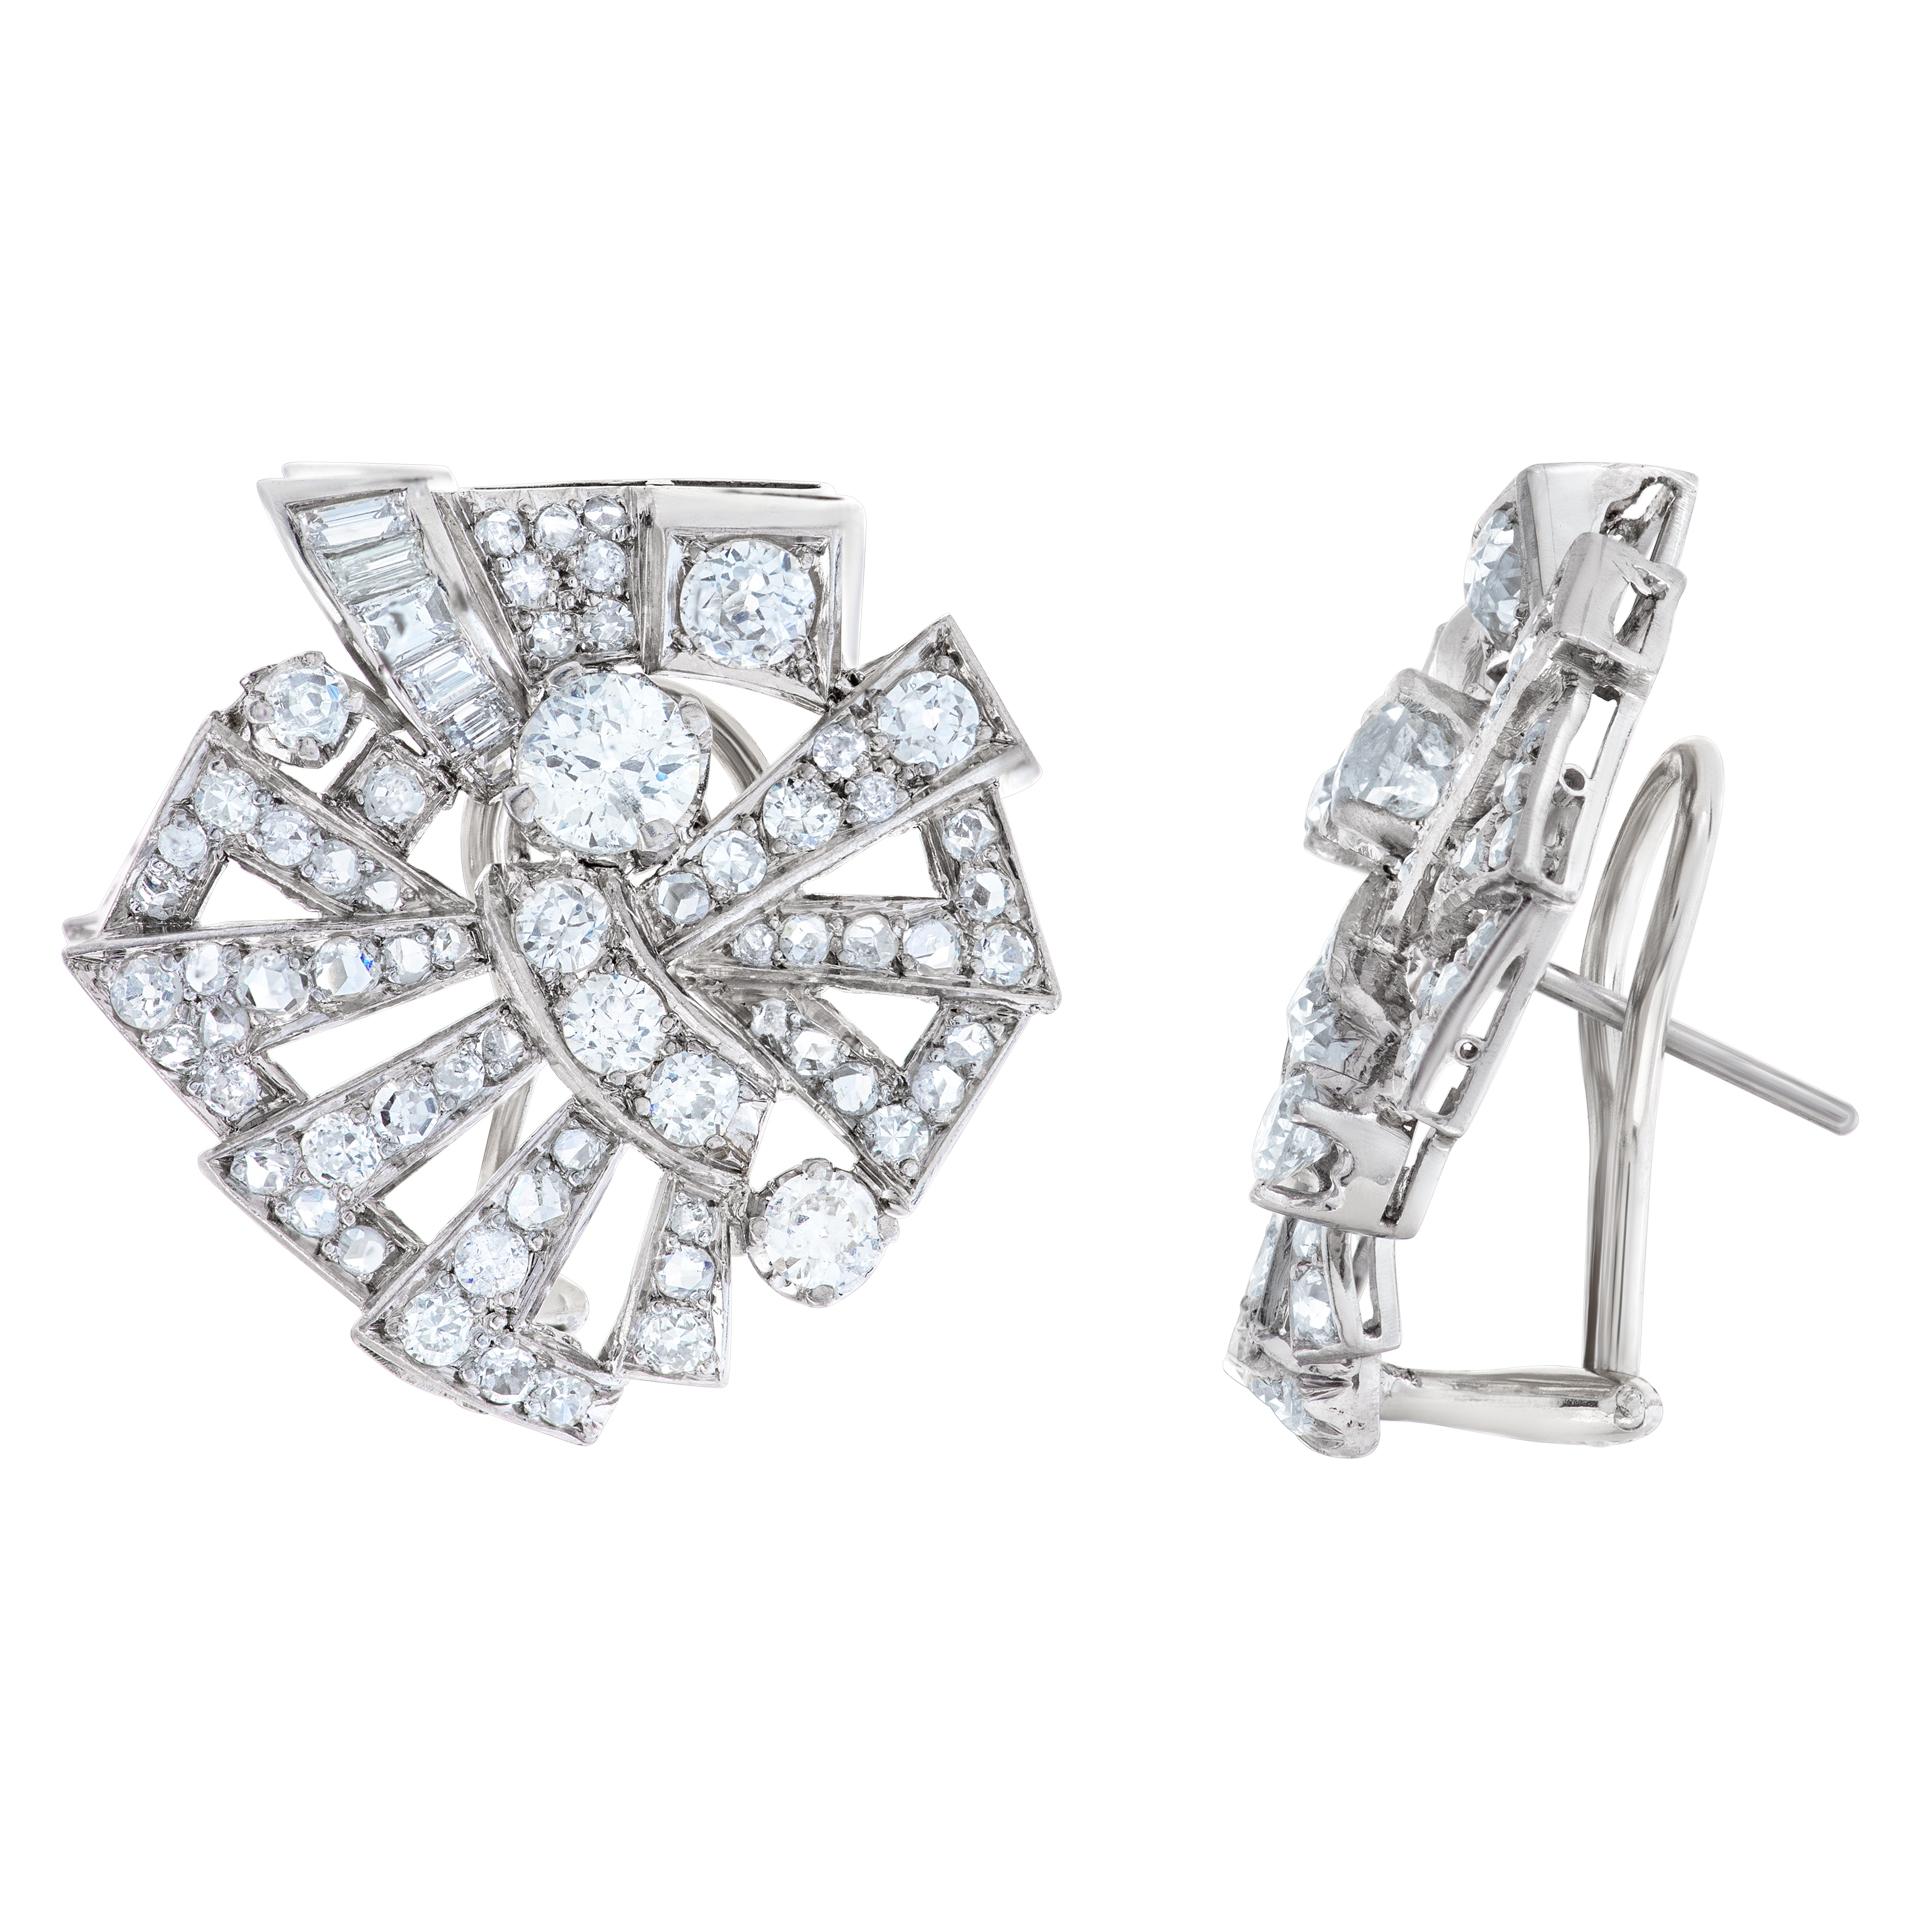 Art Deco Style Earrings With over 5 carats of Diamonds Set In Platinum For Sale 1